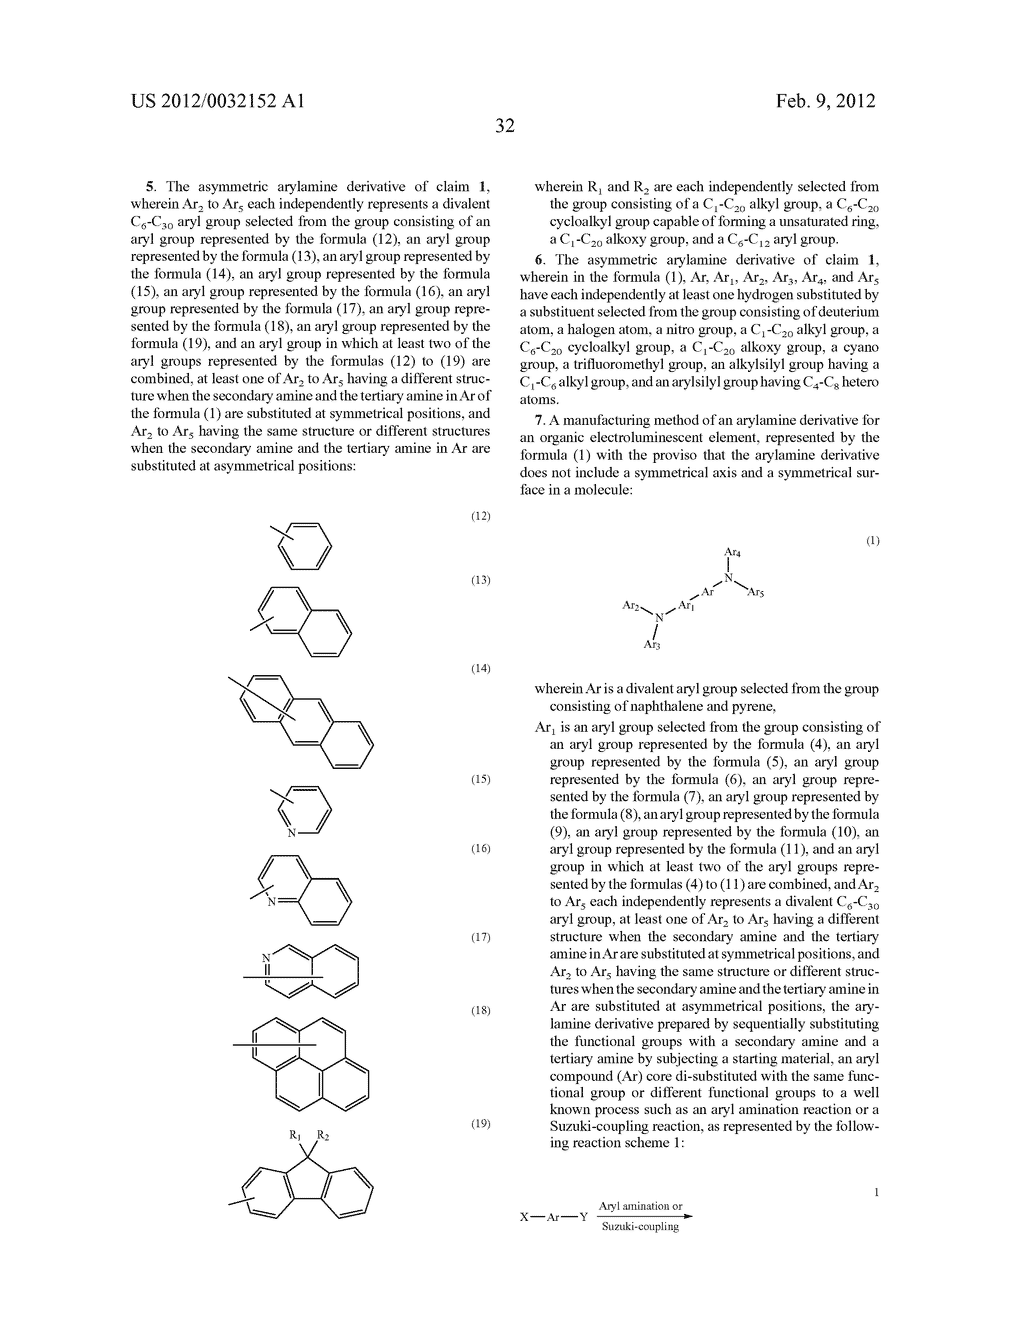 Asymmetrical Aryl Amine Derivative for Organic Electroluminescence     Devices, Method for Preparing Same, Organic  Thin Film for Organic     Electroluminescence Devices and Organic Electroluminescence Device Using     Same - diagram, schematic, and image 34